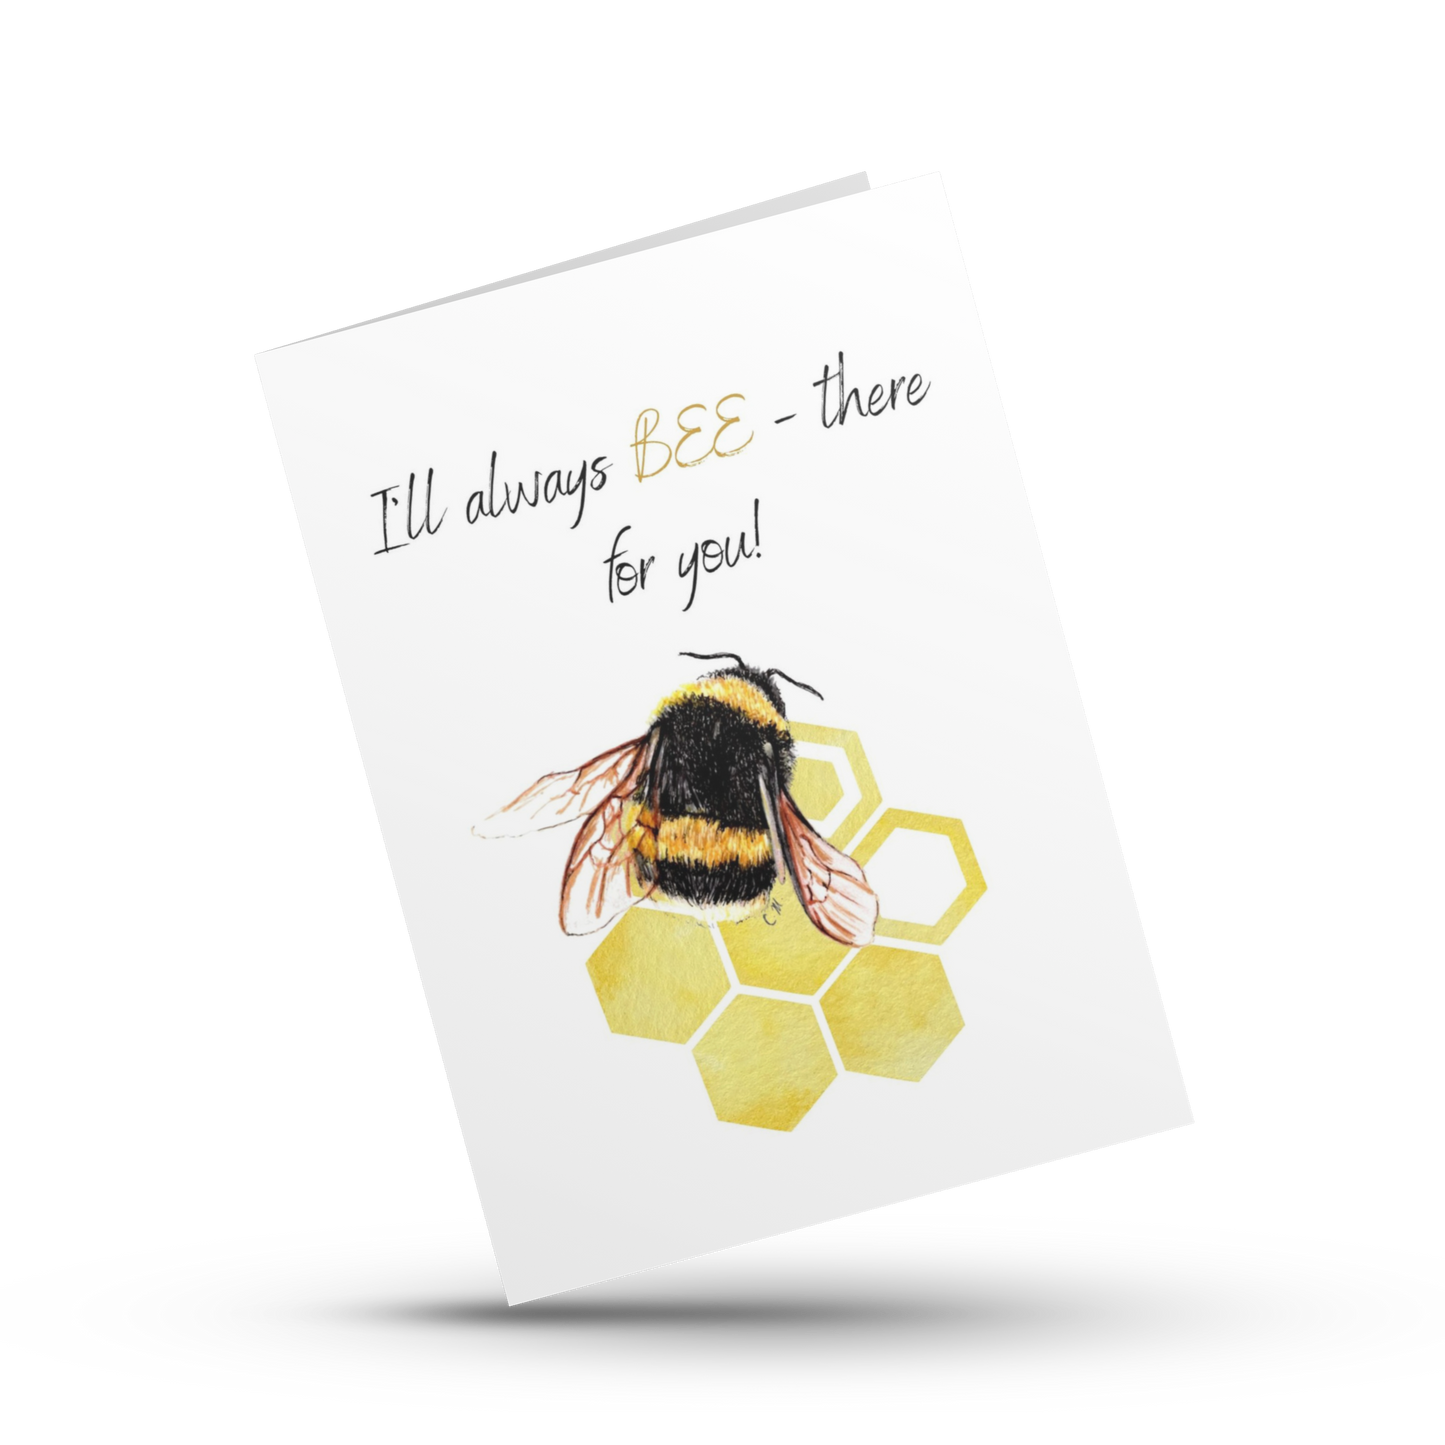 I'll always bee there for you, Thinking of you, Bee pun card, Moral support card, Card for her, Card for him, Card for friend, Sympathy card